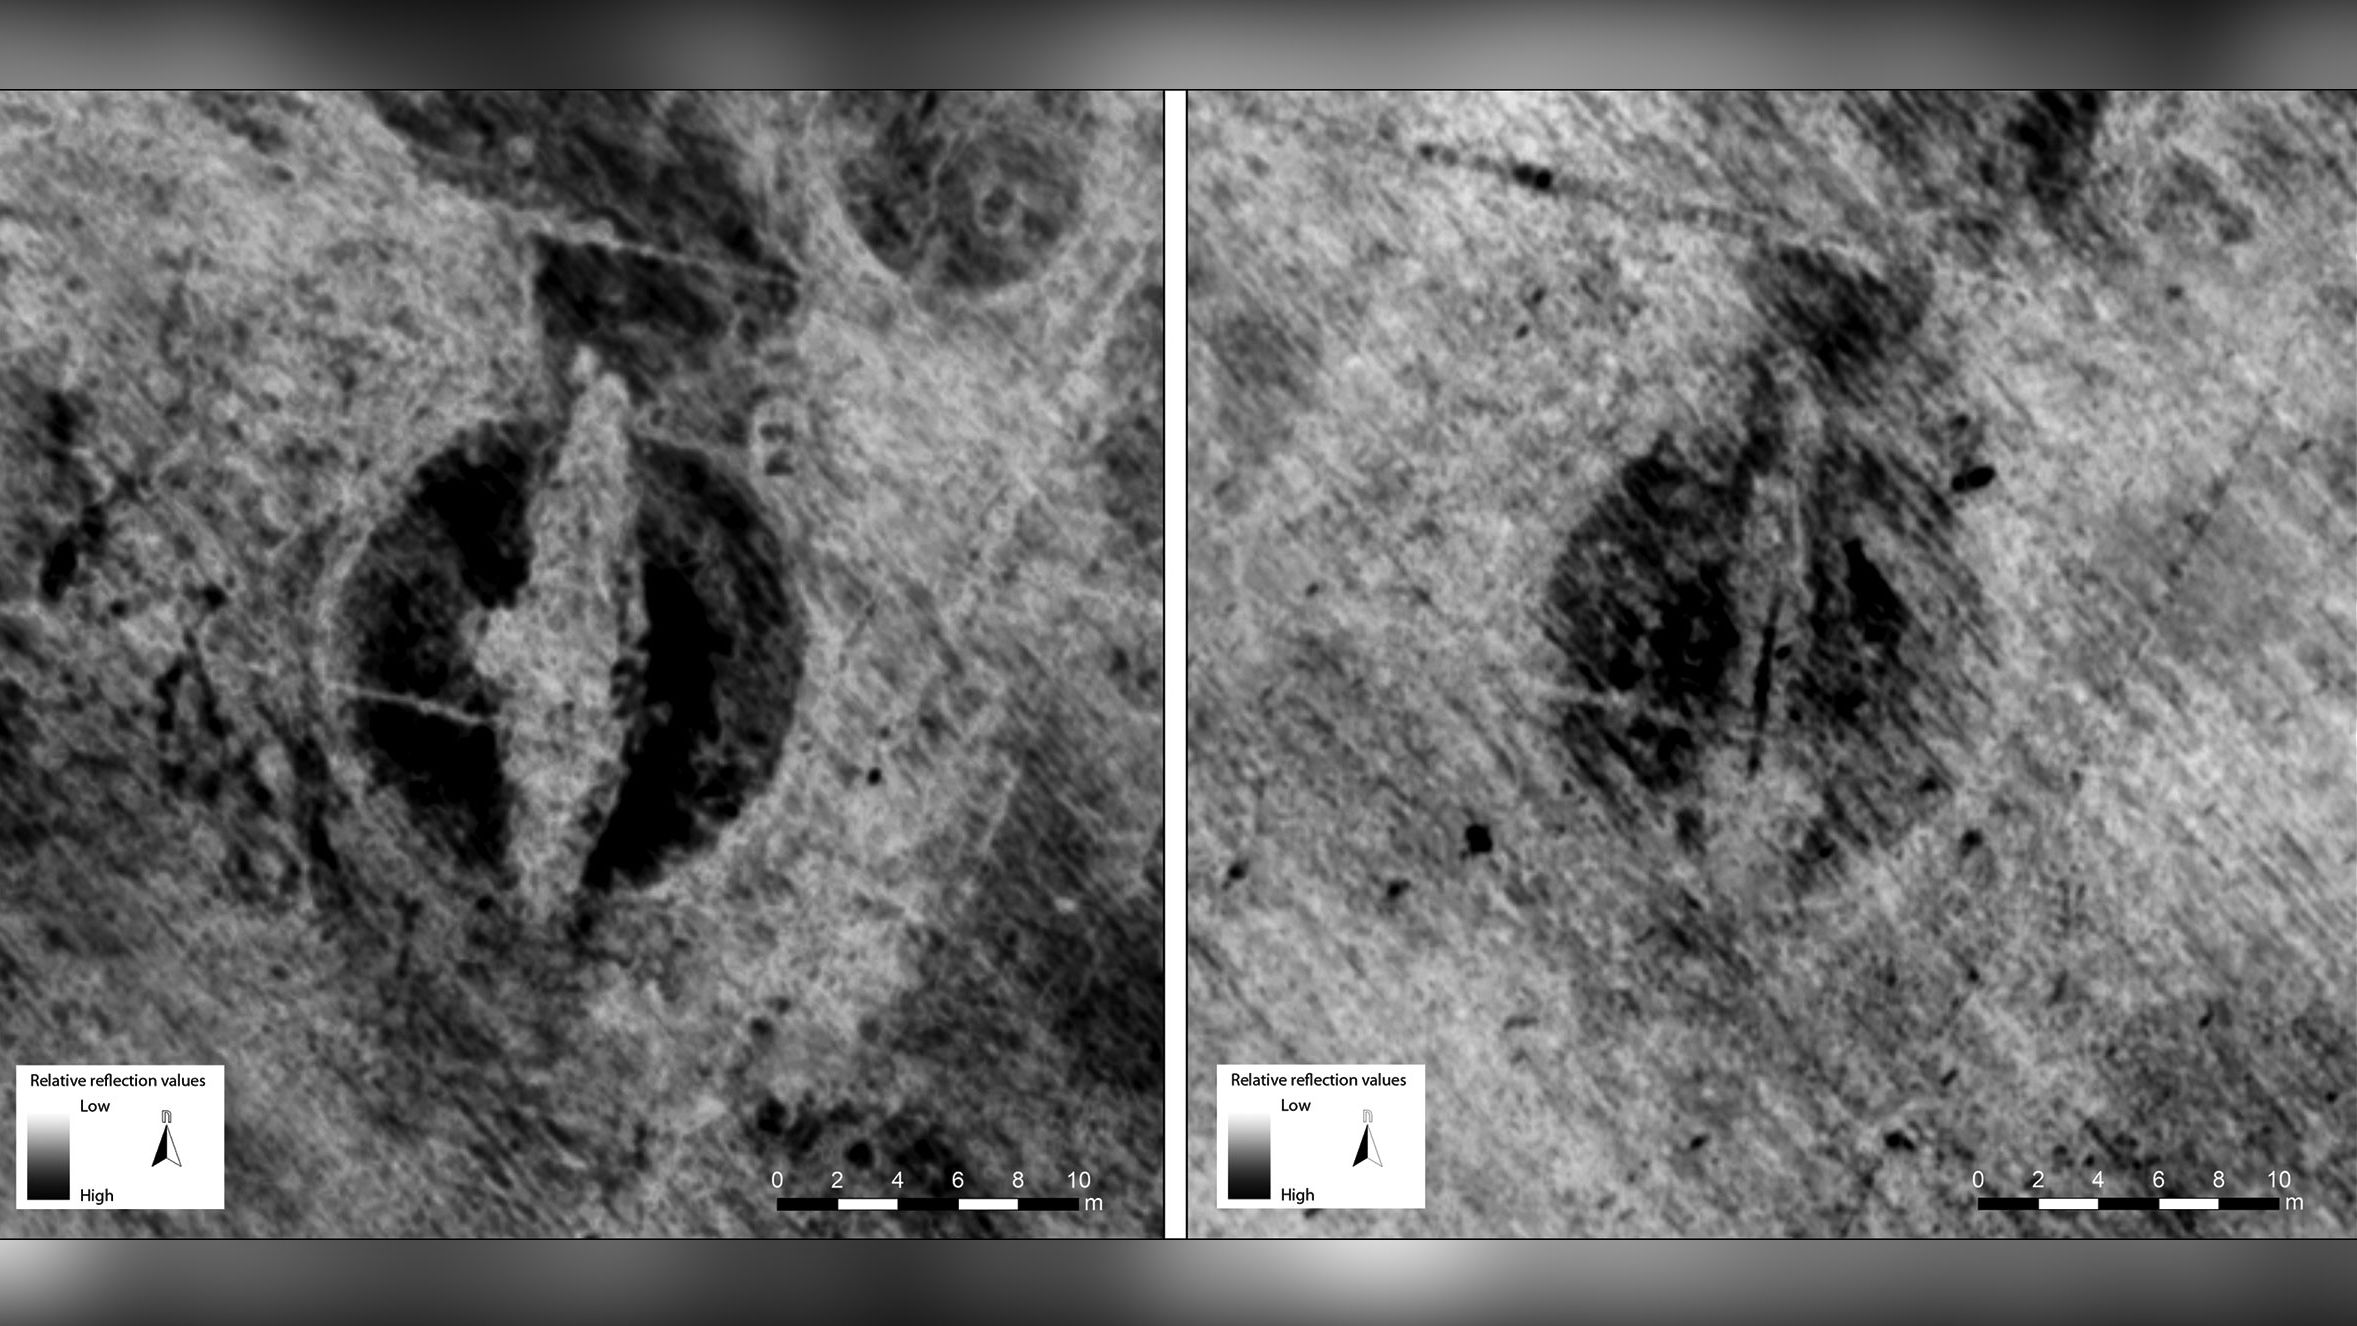 The remains of a Viking Age ship have recently been discovered in Norway using ground-penetrating radar technology. 